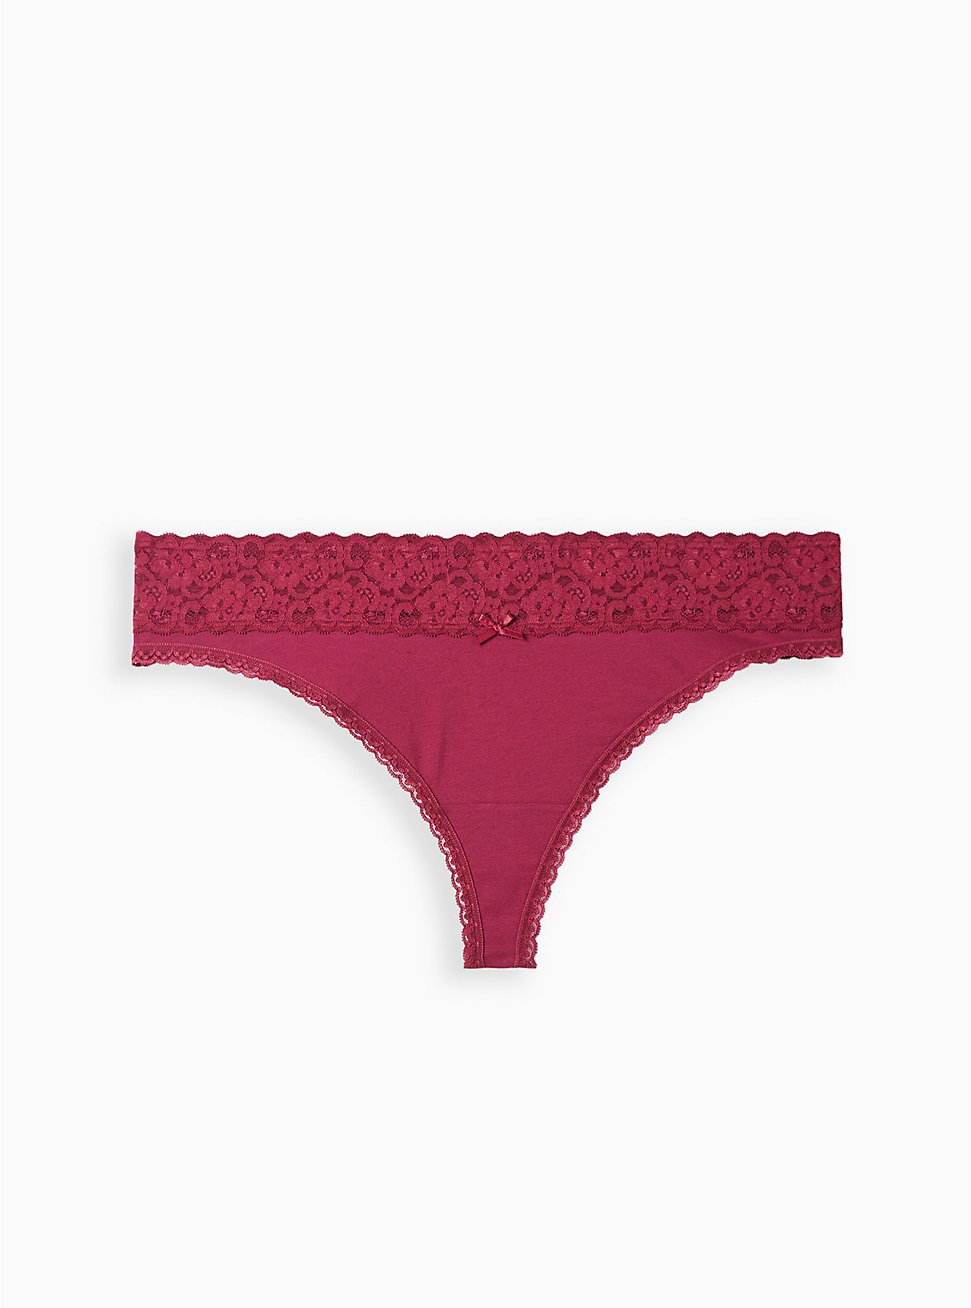 Cotton Mid-Rise Thong Lace Trim Panty, UNIMPRESSED CATS PINK, hi-res